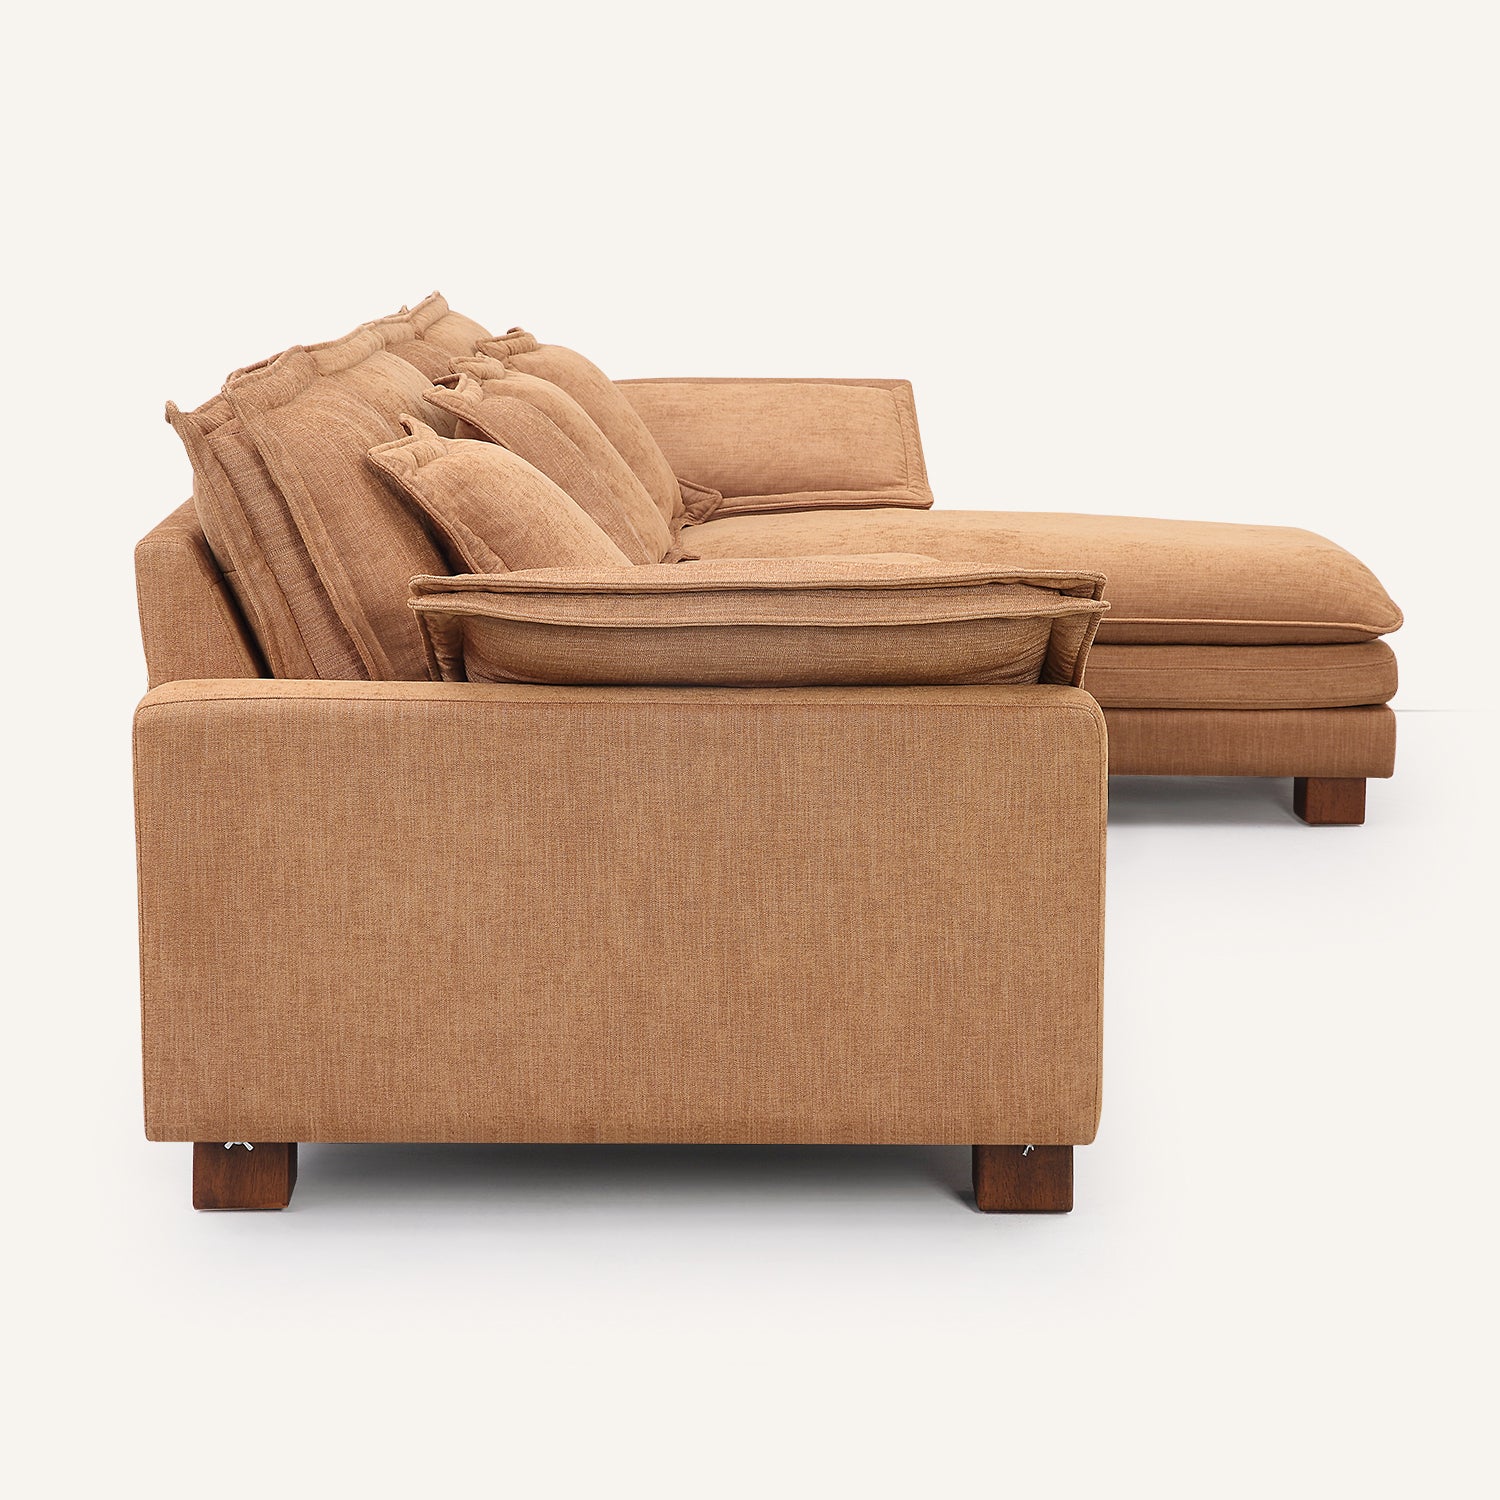 Stacked Tan Linen 5-Seat Sofa with Chaise